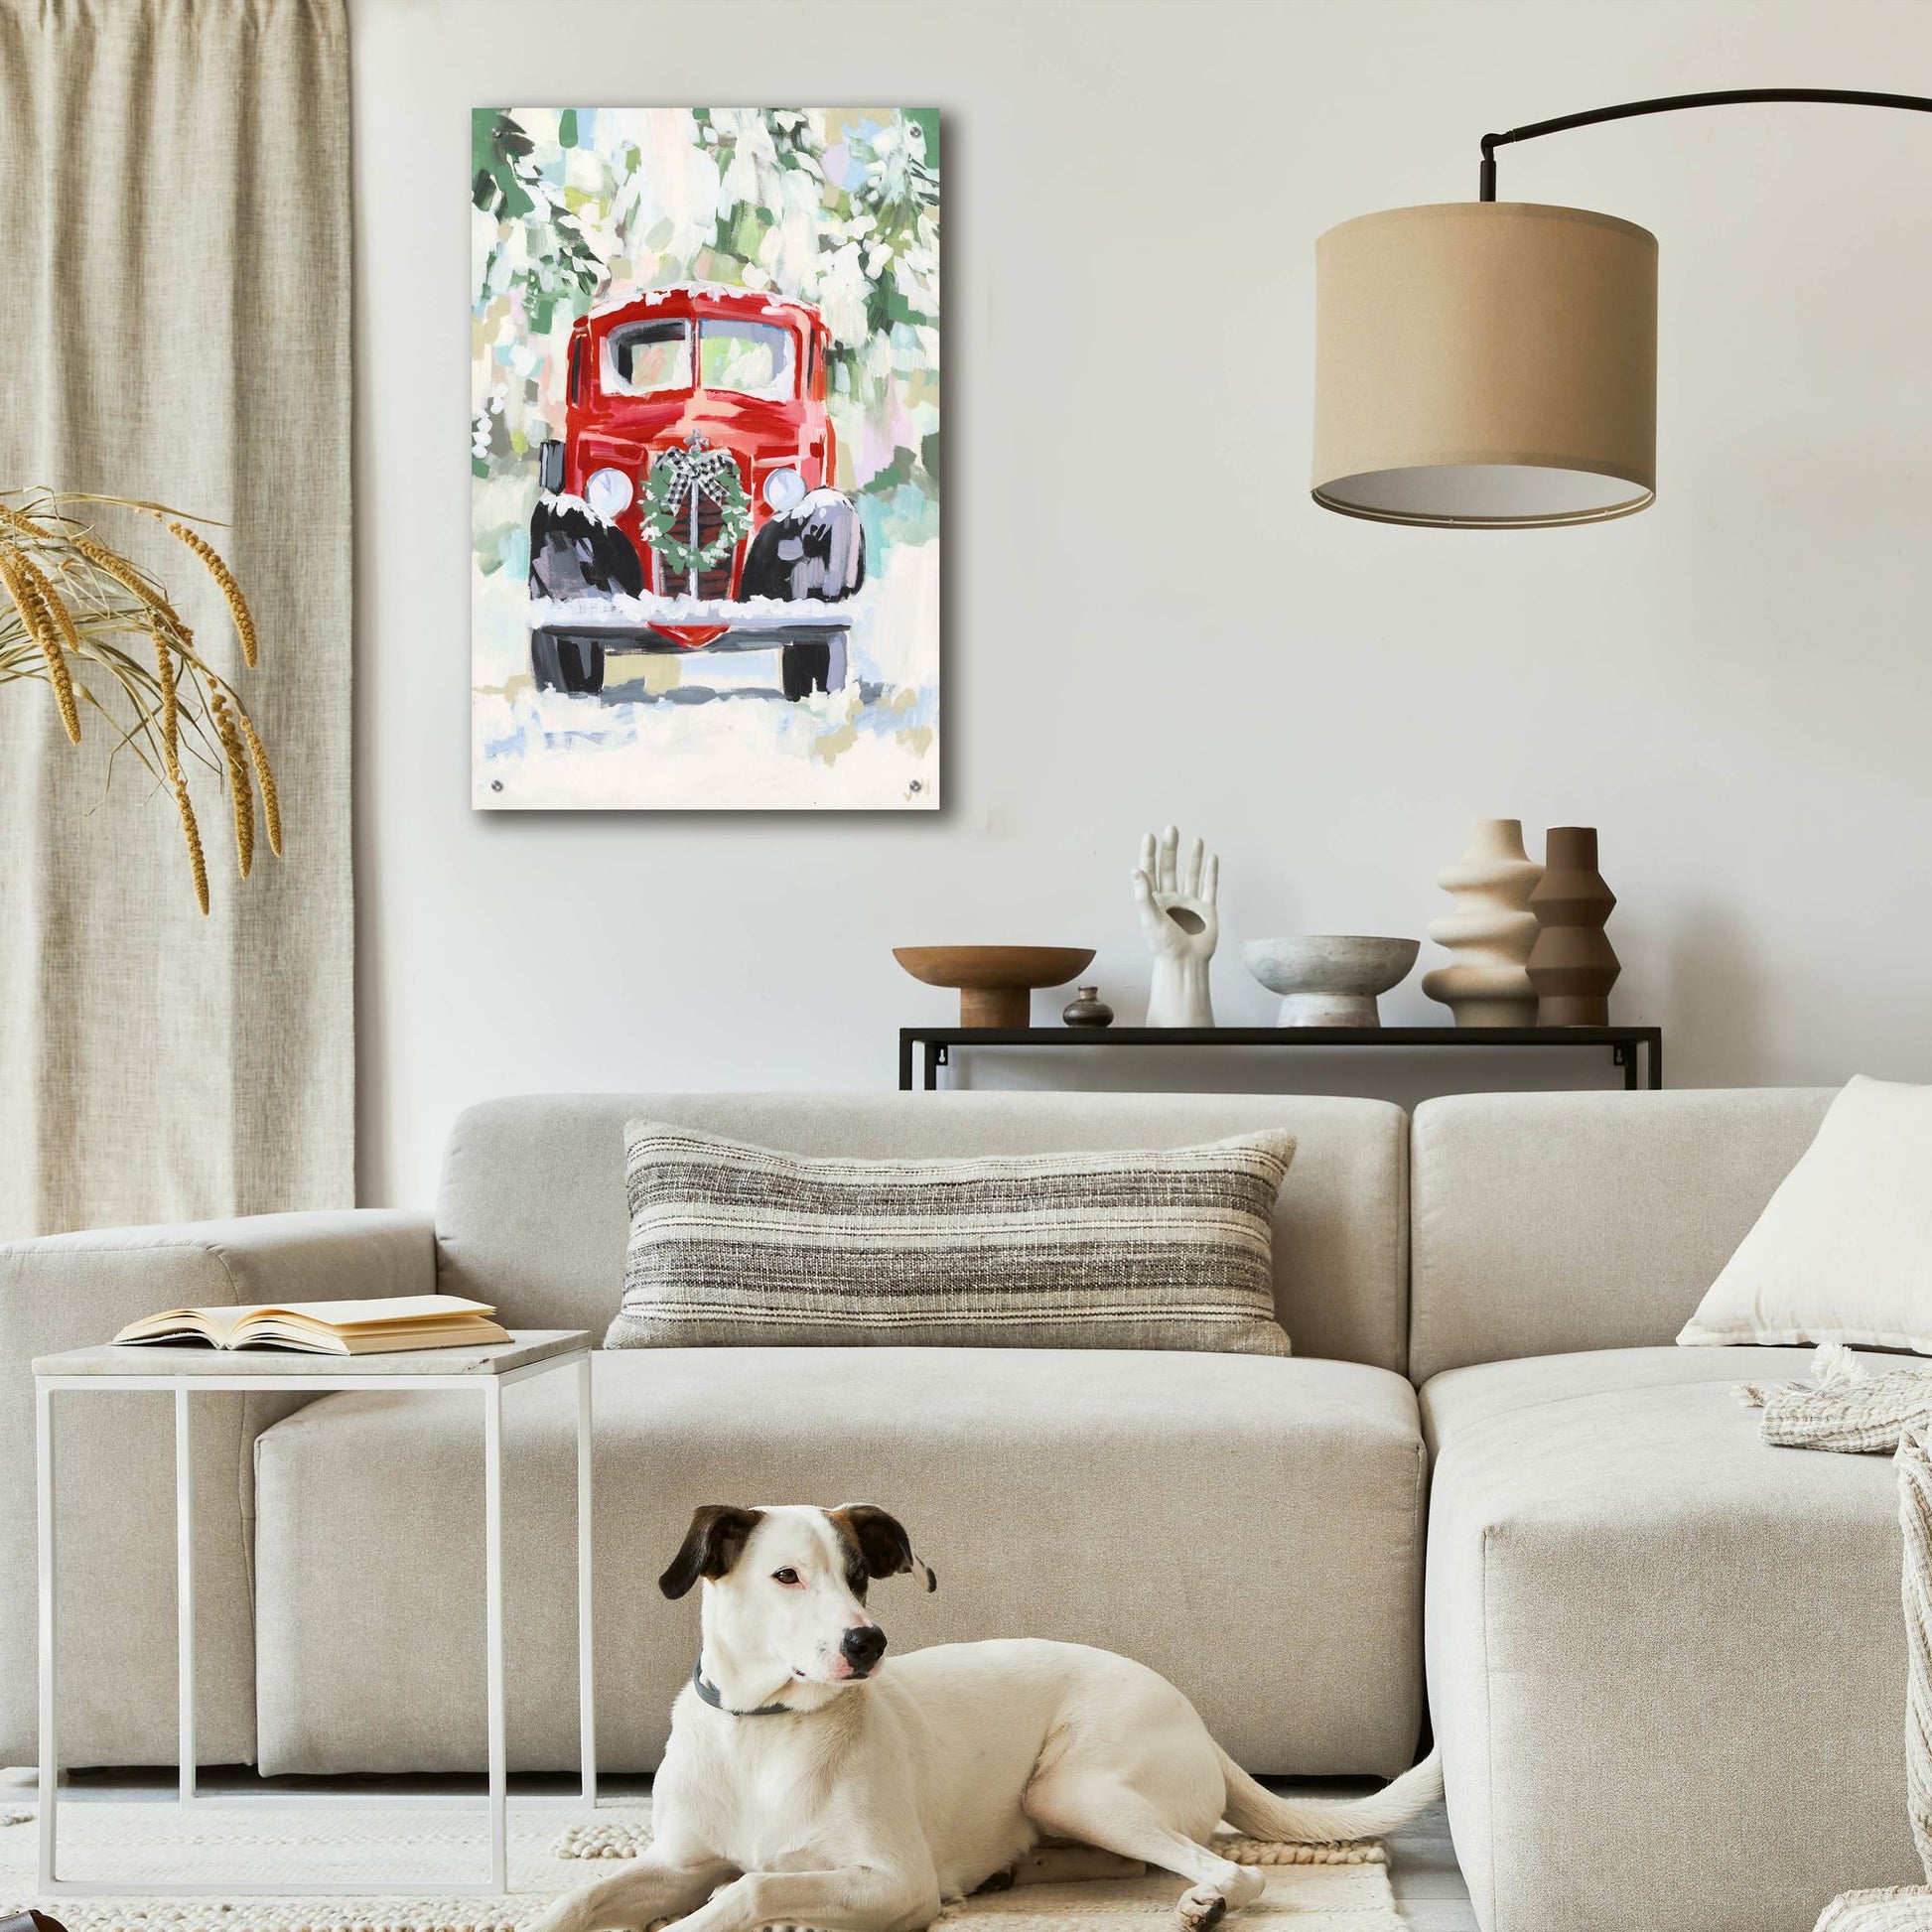 Epic Art 'Red Vintage Truck with Wreath' by Jenny Westenhofer, Acrylic Glass Wall Art,24x36